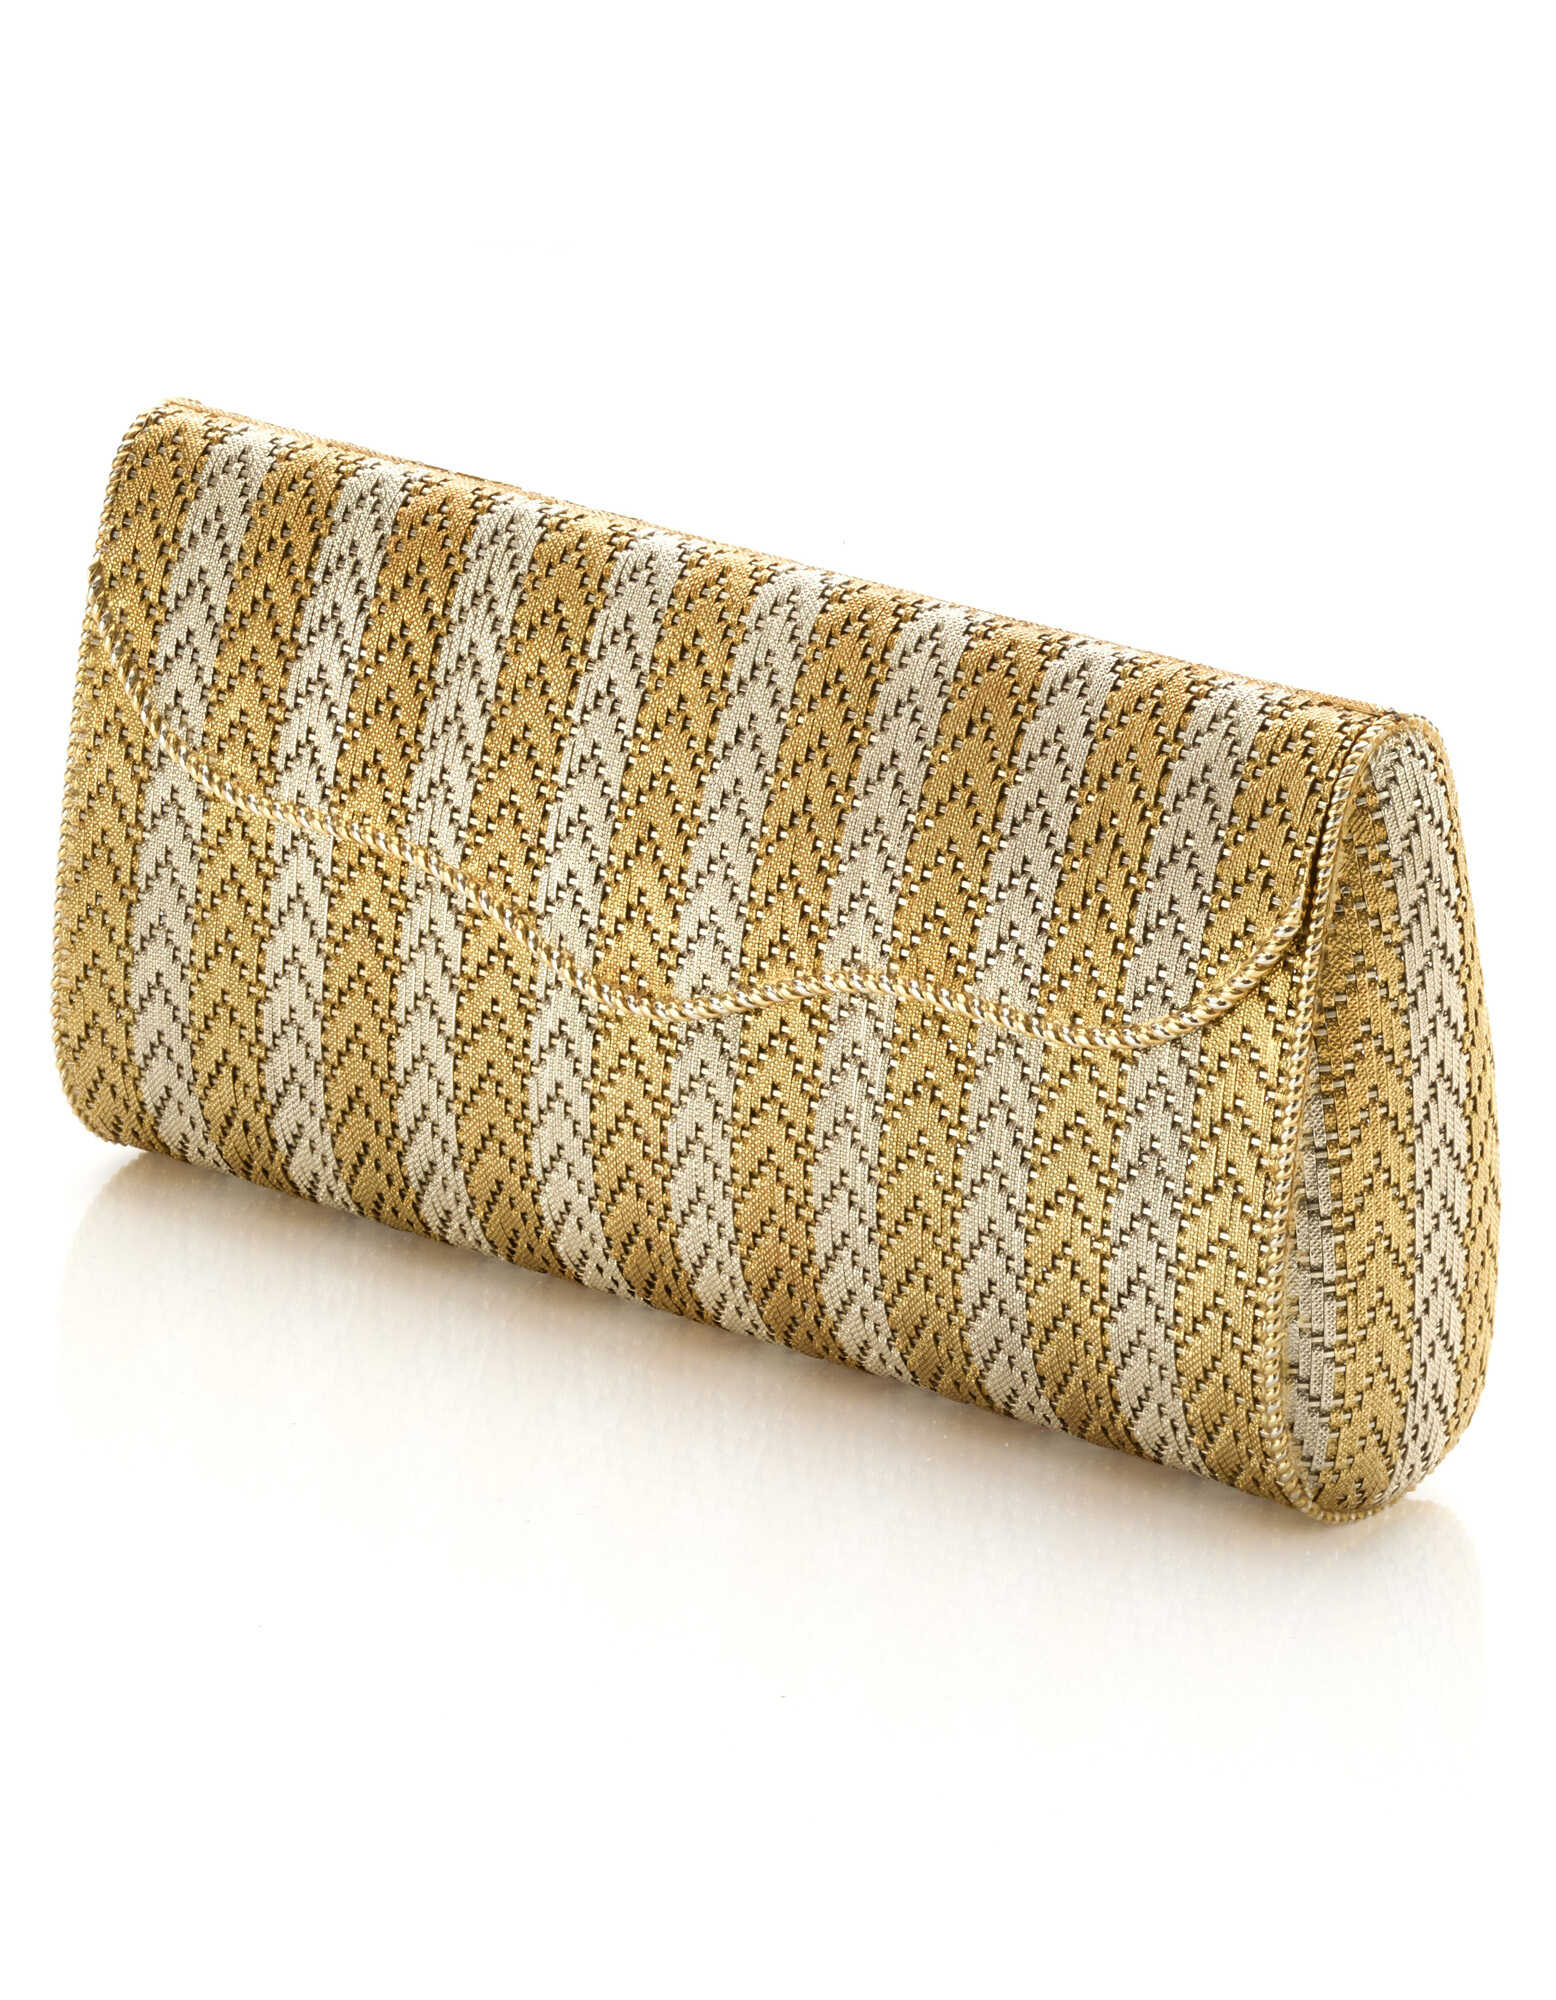 Bi-coloured chiseled gold clutch evening bag with inside mirror, gross g 425.01 circa, length cm 18.7, width cm 8.9 circa. Marked 866 AL. (slight defect to the mirror)